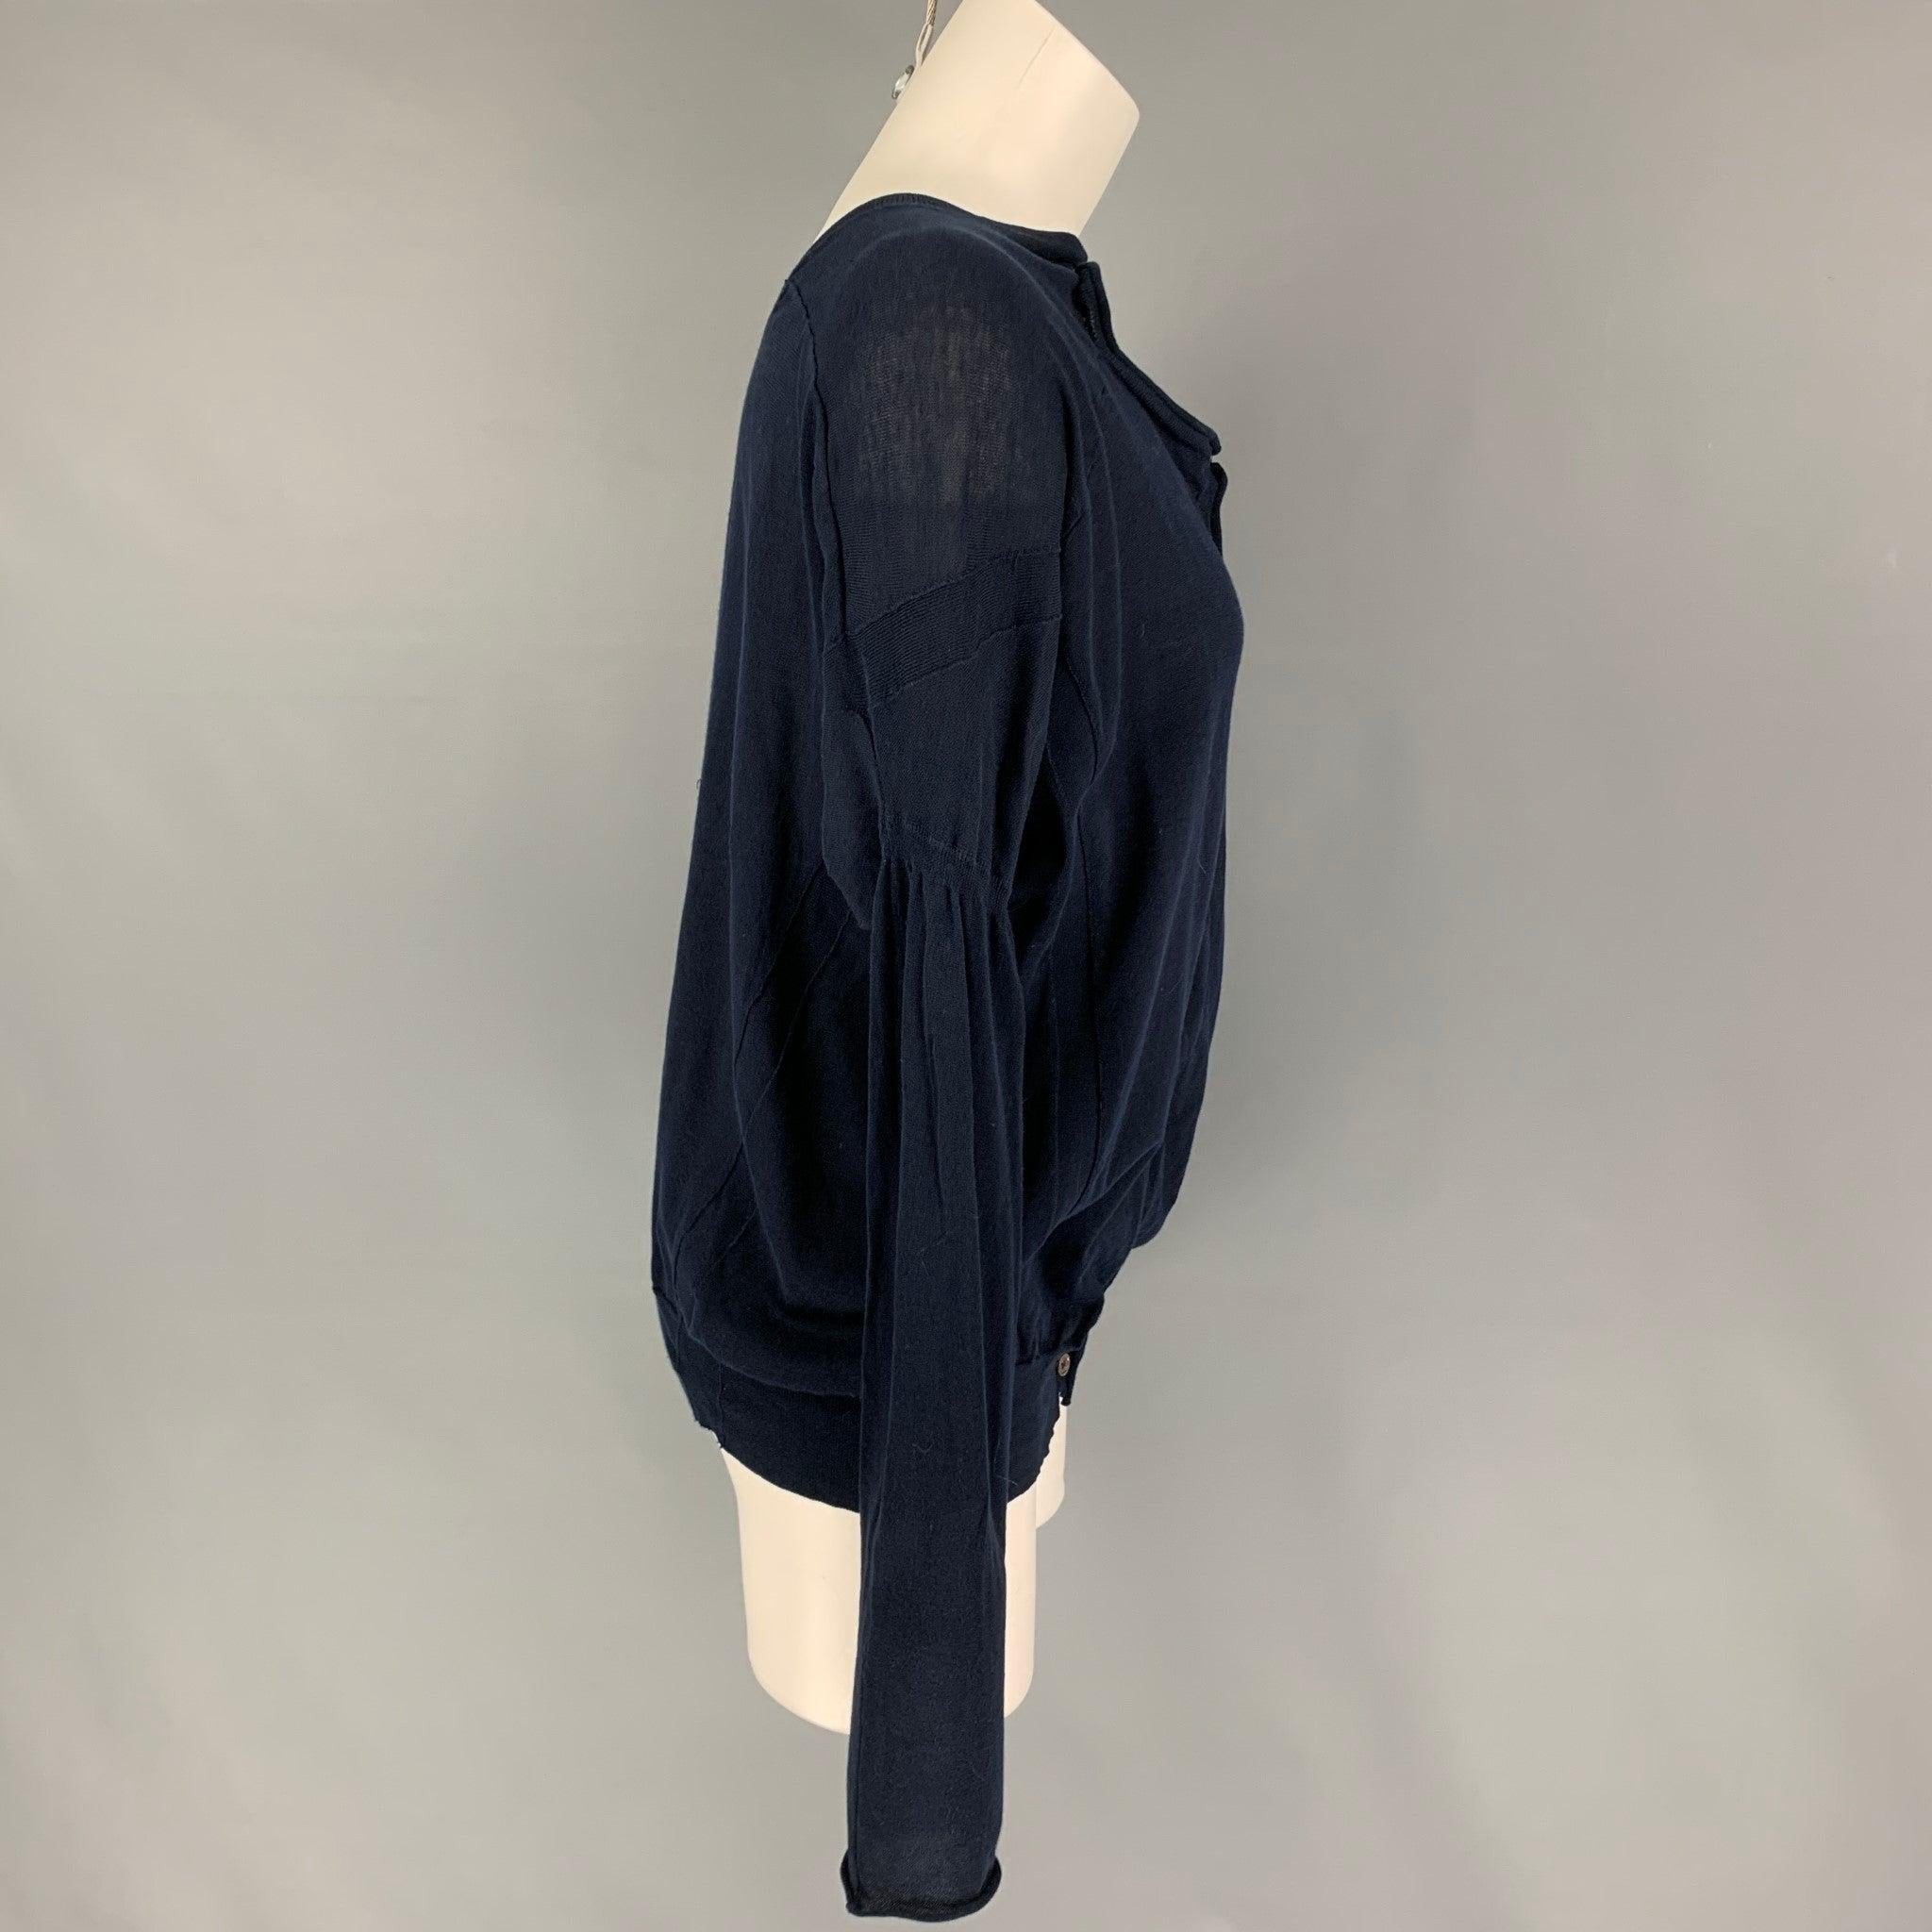 MARNI pullover comes in a navy cotton featuring dolman sleeves, front cut-out design, and a buttoned closure. Made in Italy.
Very Good
Pre-Owned Condition. 

Marked:   40 

Measurements: 
 
Shoulder: 16.5 inches  Bust: 46 inches  Sleeve: 24 inches 